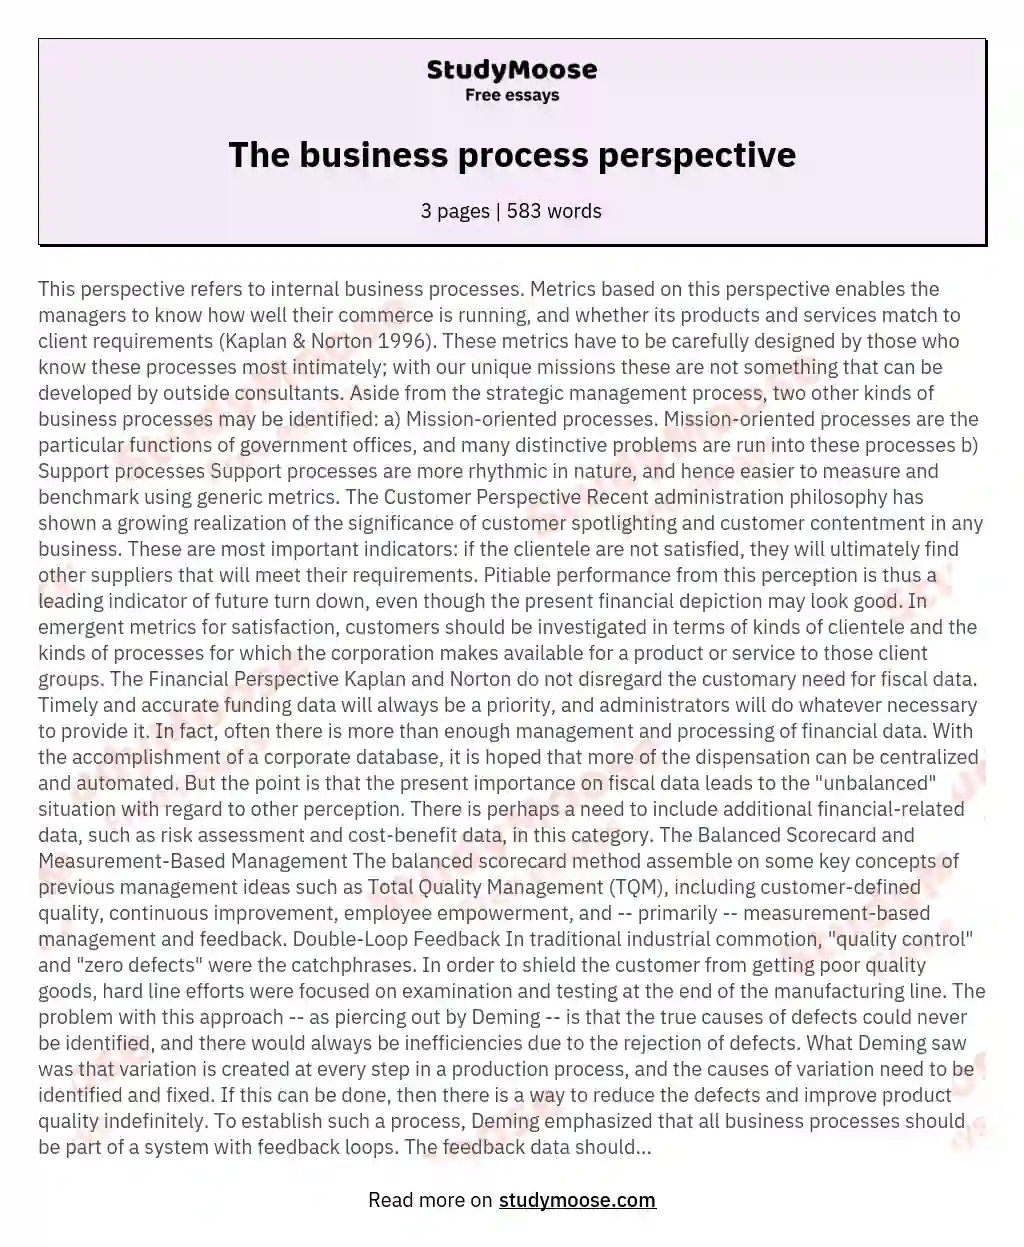 The business process perspective essay